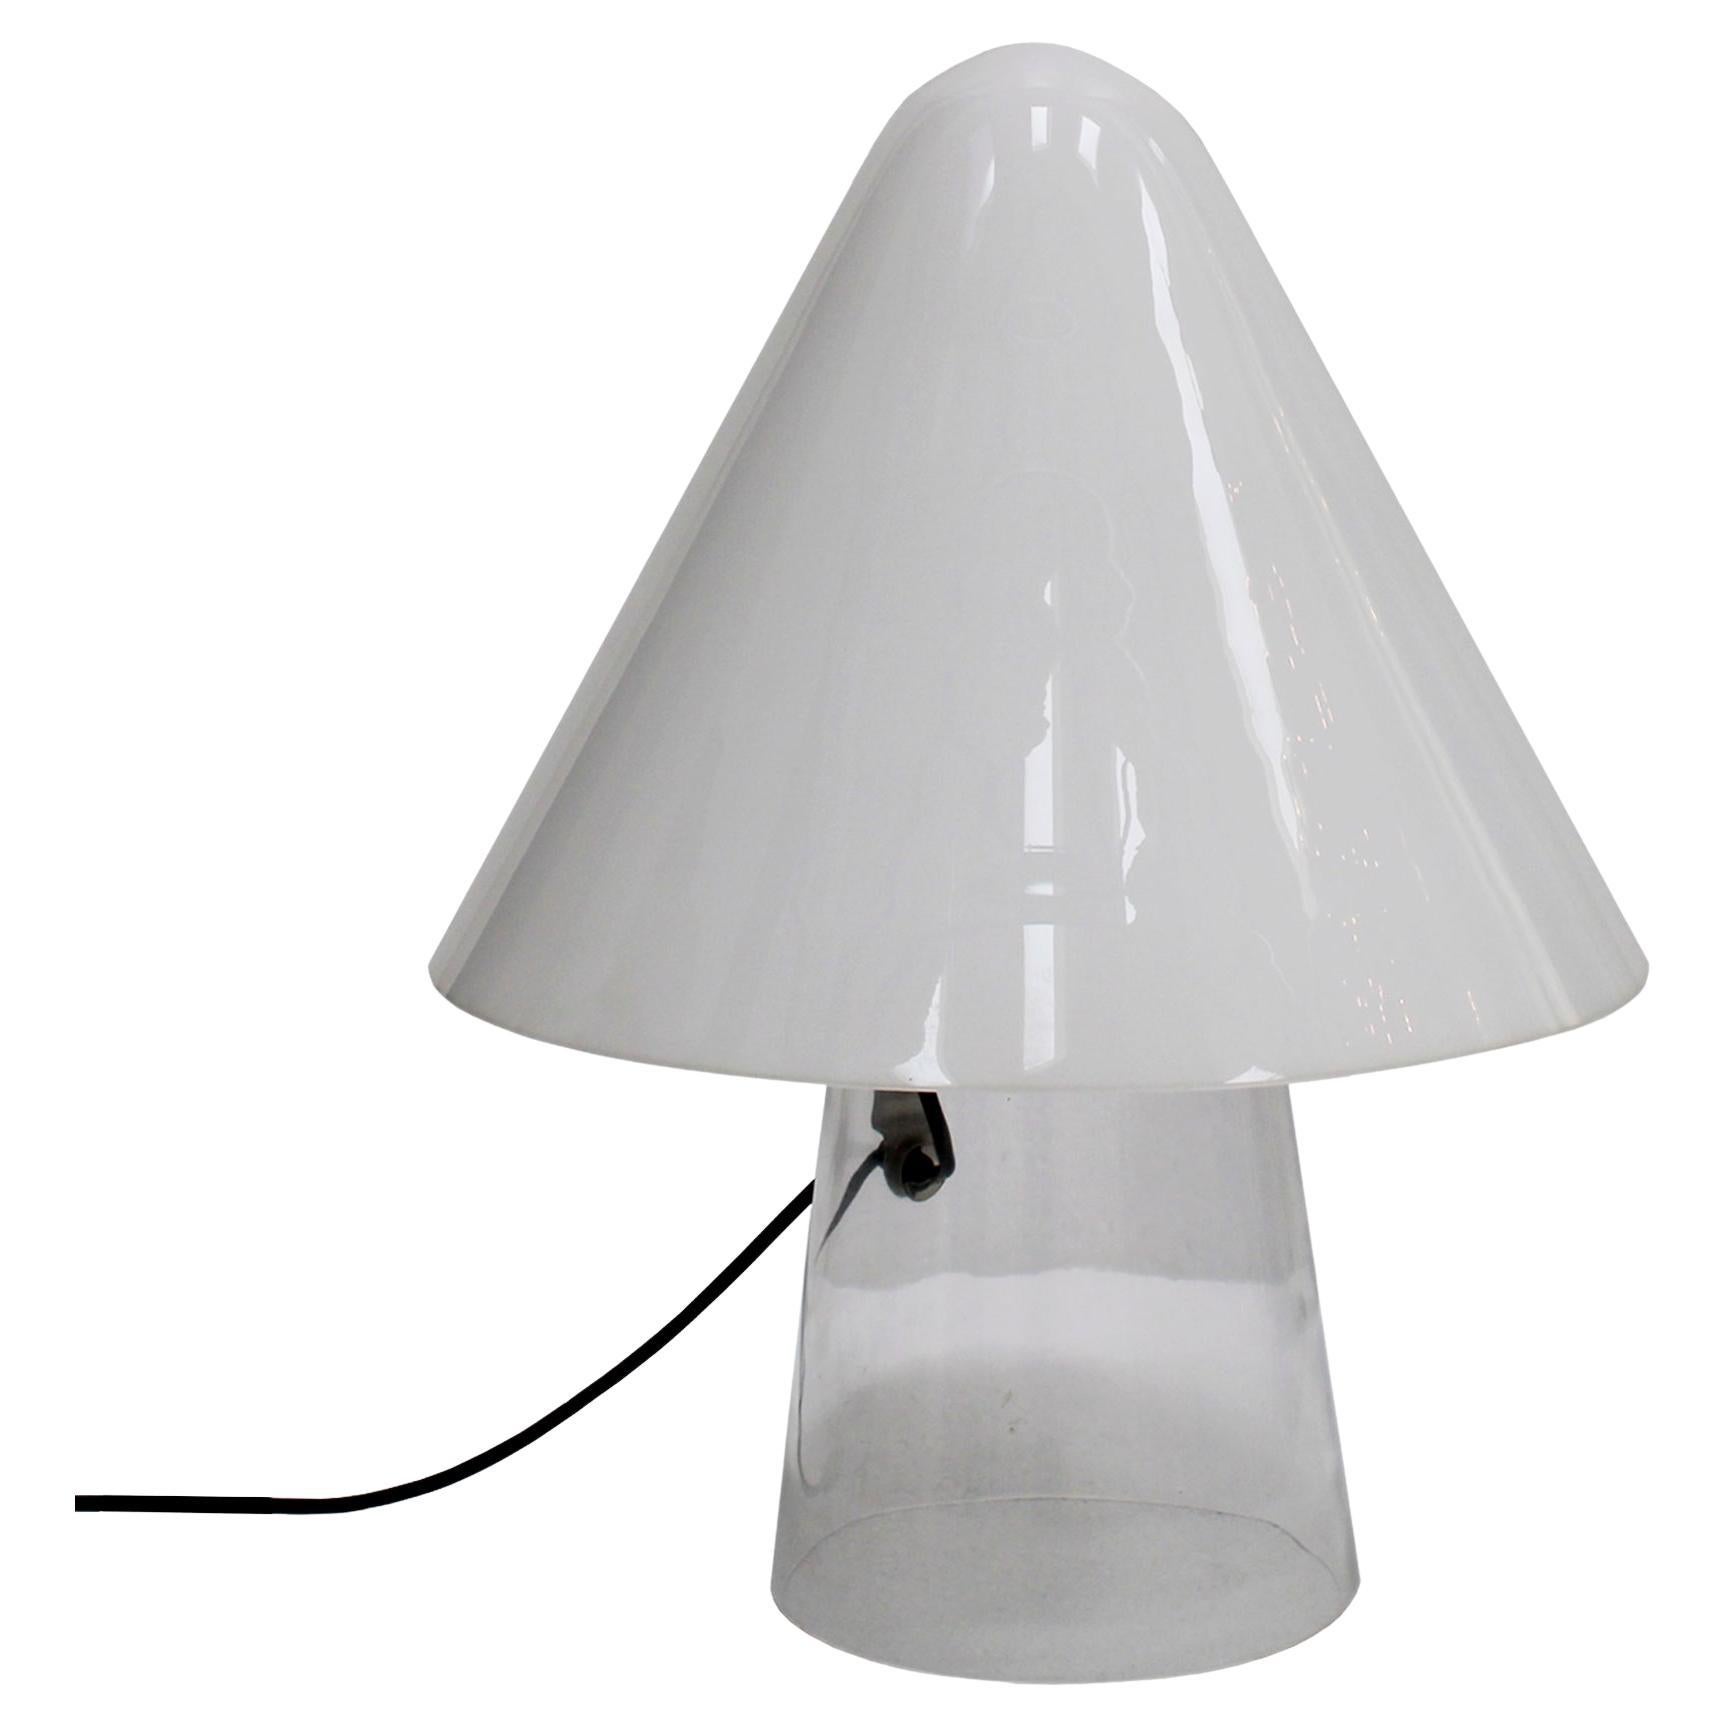 Mushroom Shaped White and Clear Glass Table Lamp Designed by Mauro Marzollo